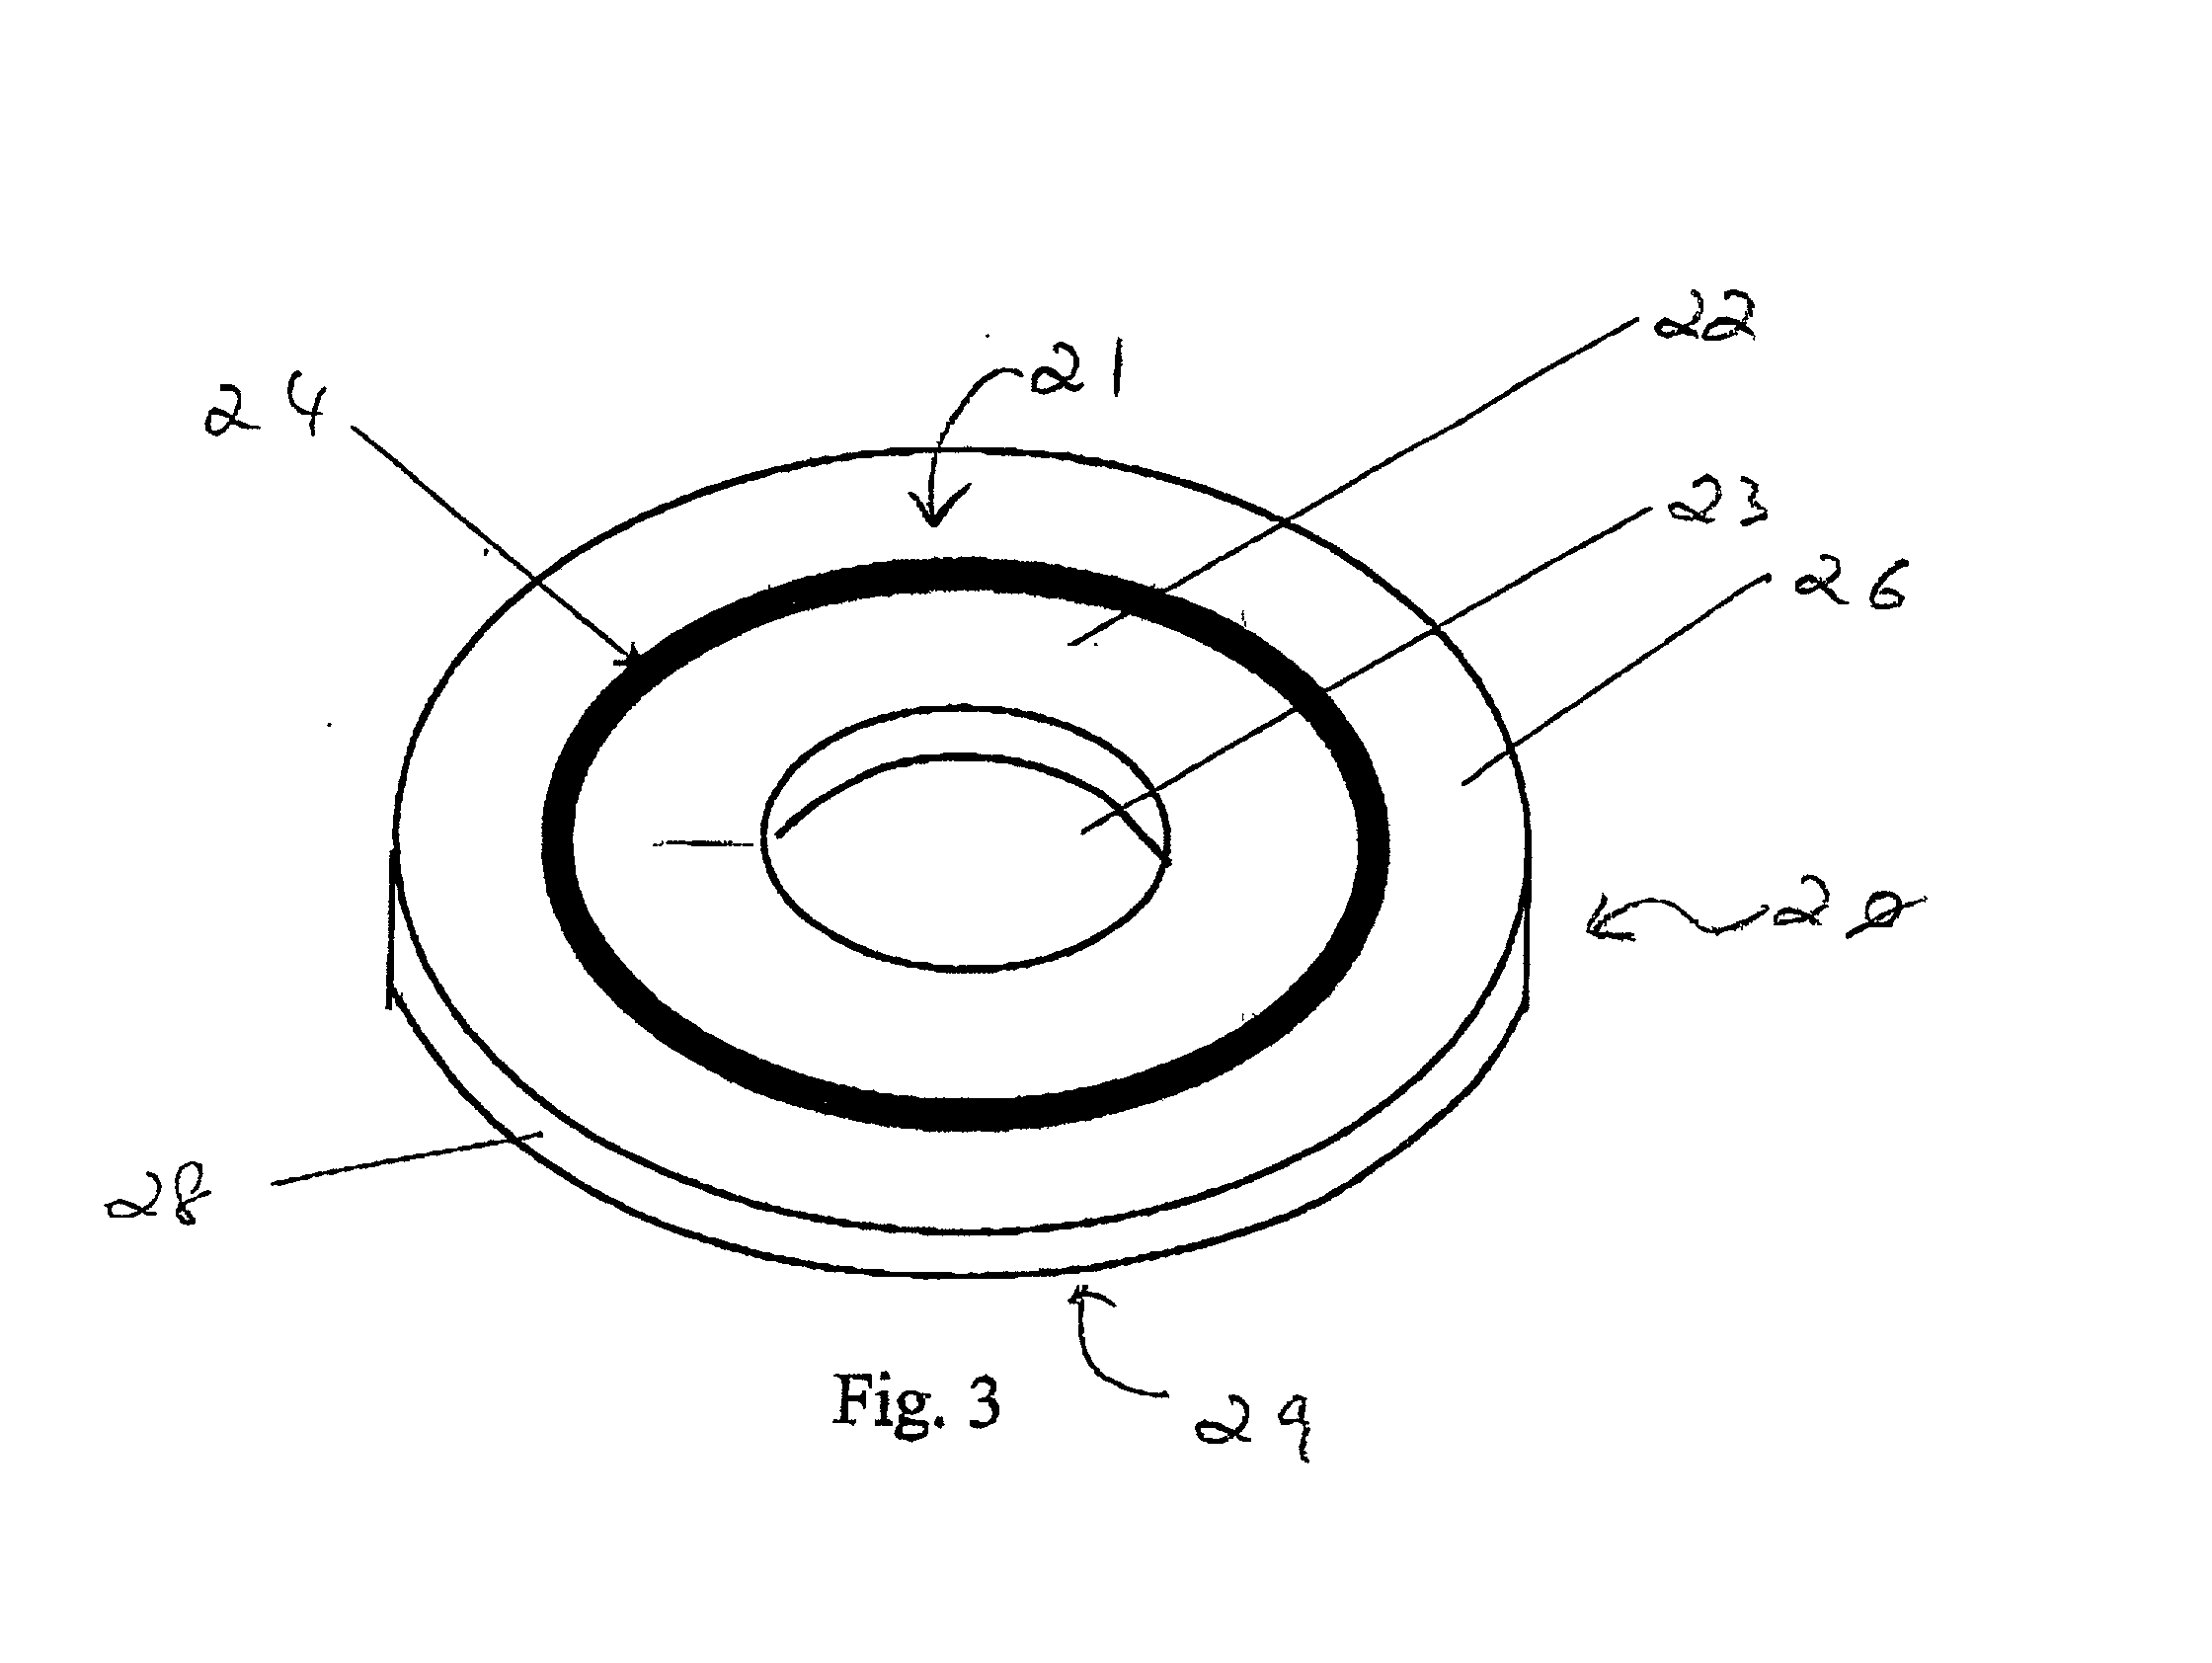 Ring-shaped piezoelectric transformer having an inner and outer electrode